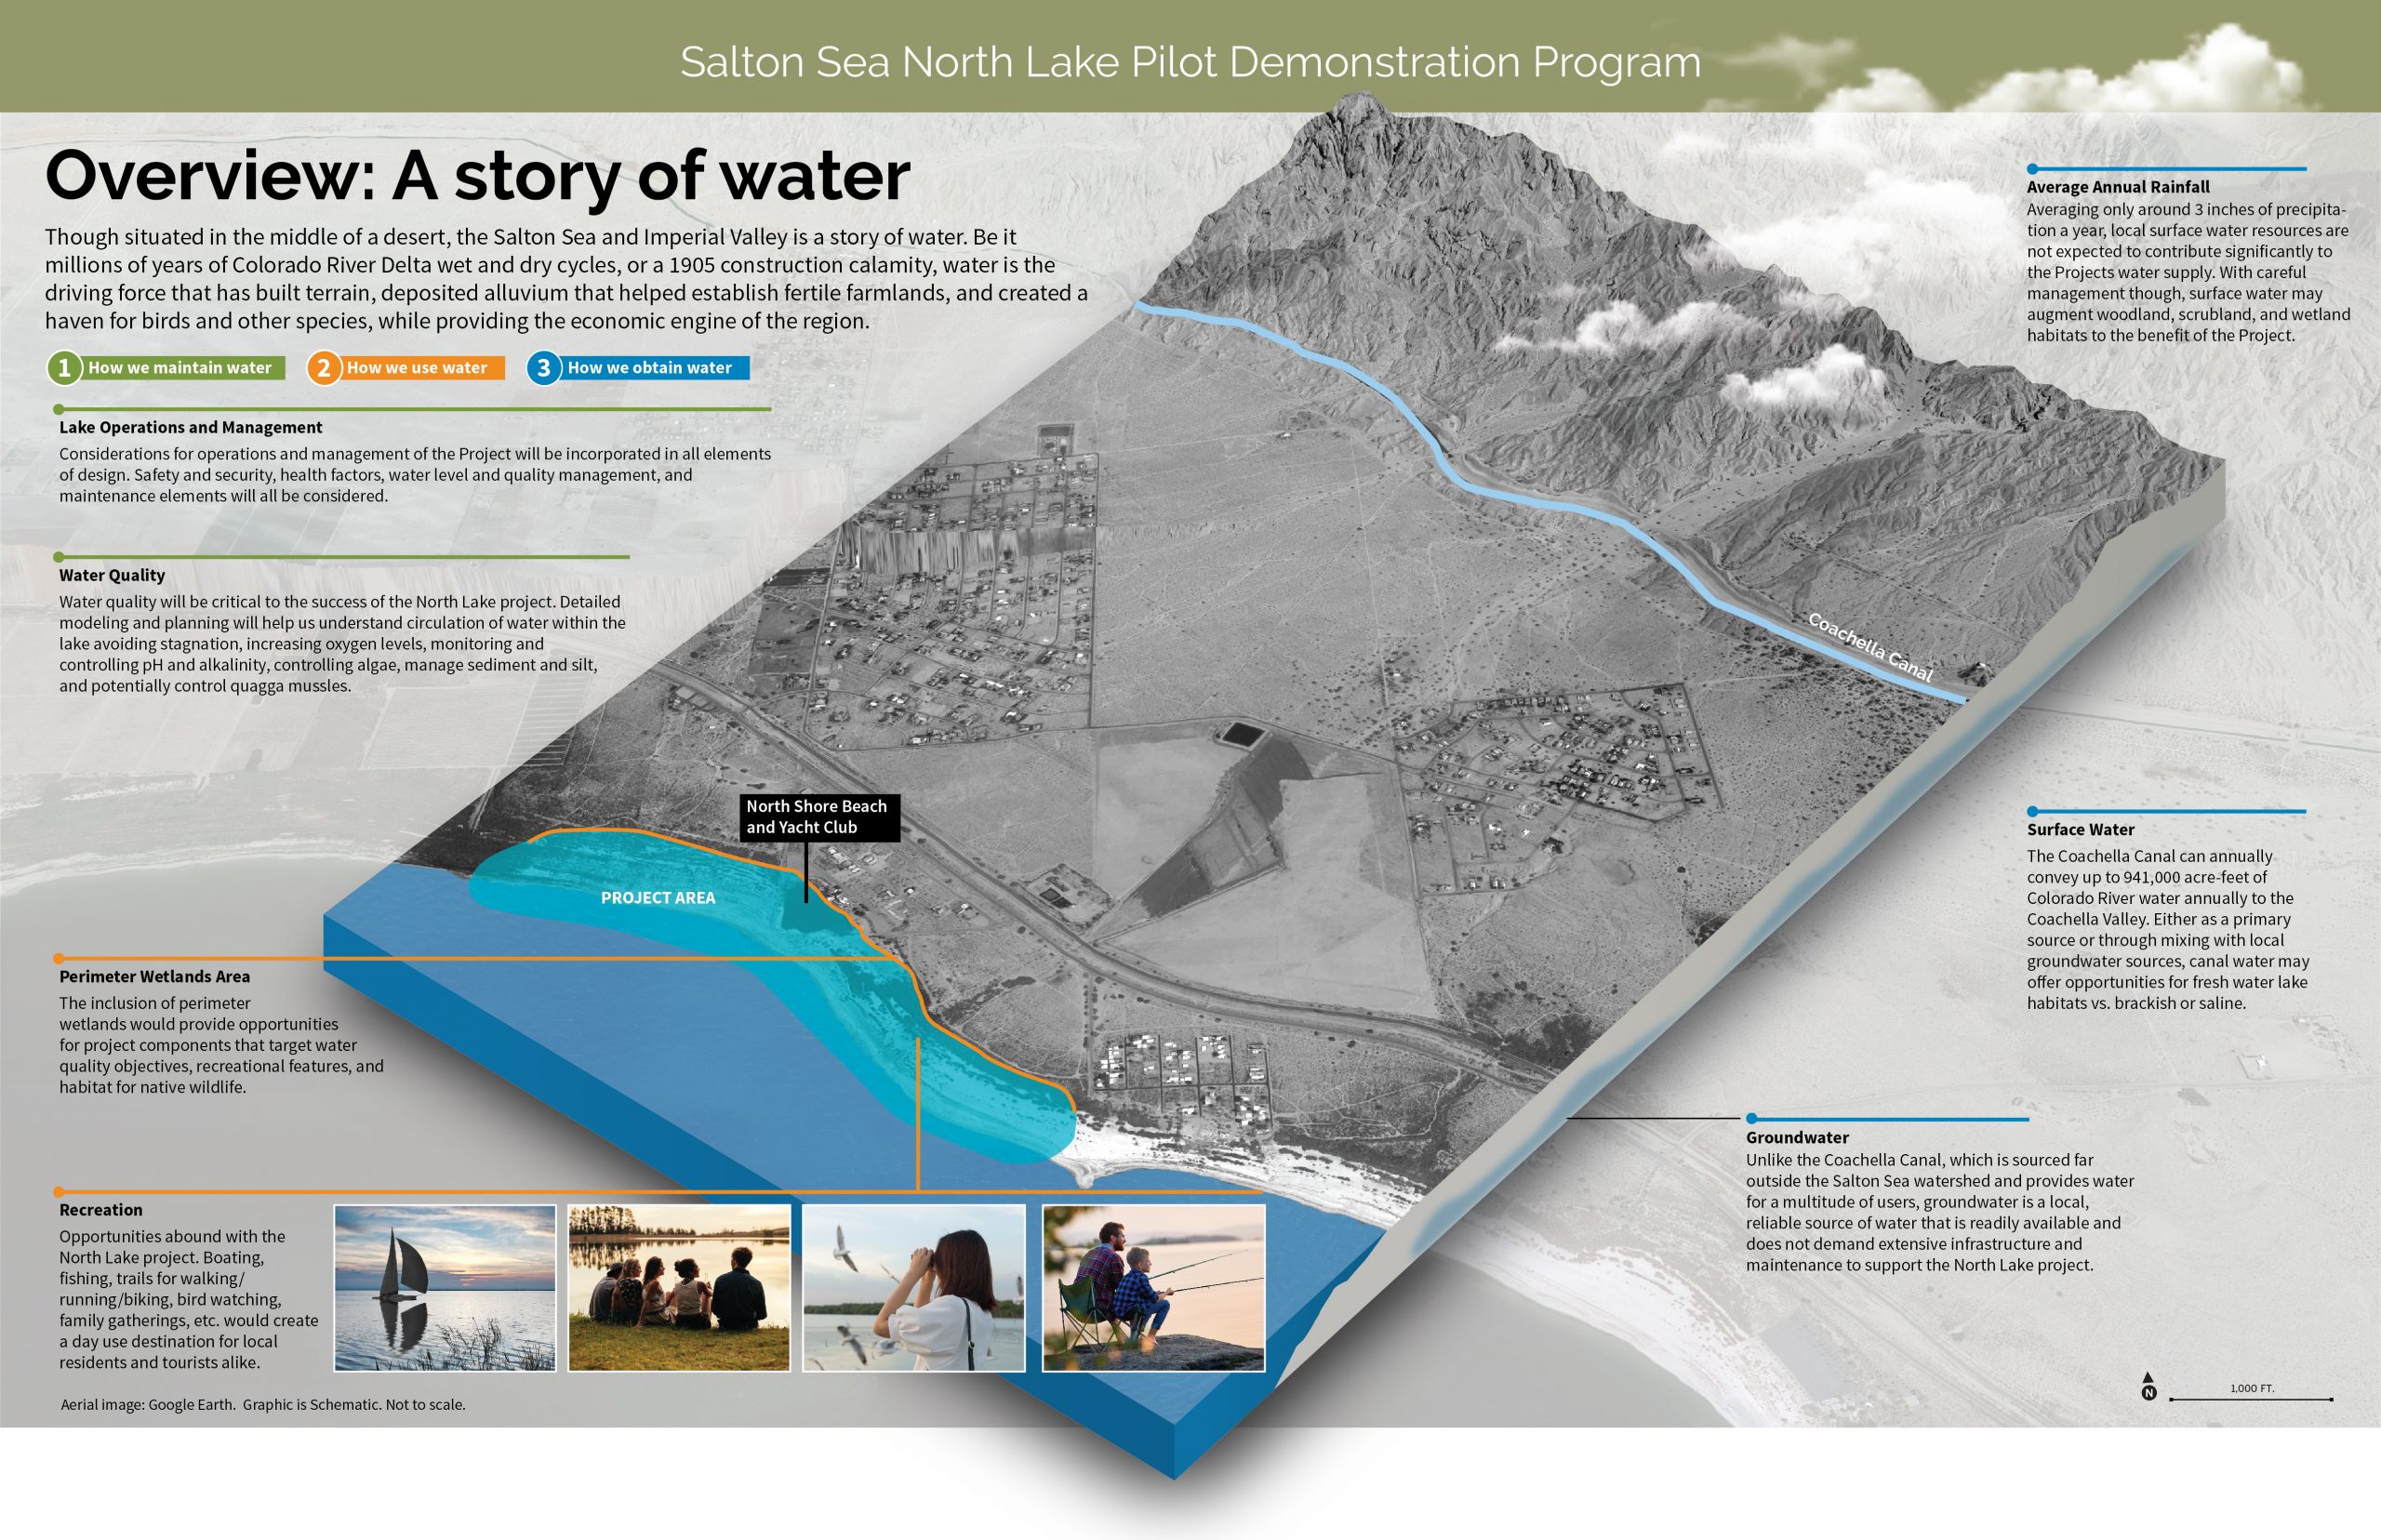 Data visualization by Dudek showing an overview of the water story/history of the Salton Sea.